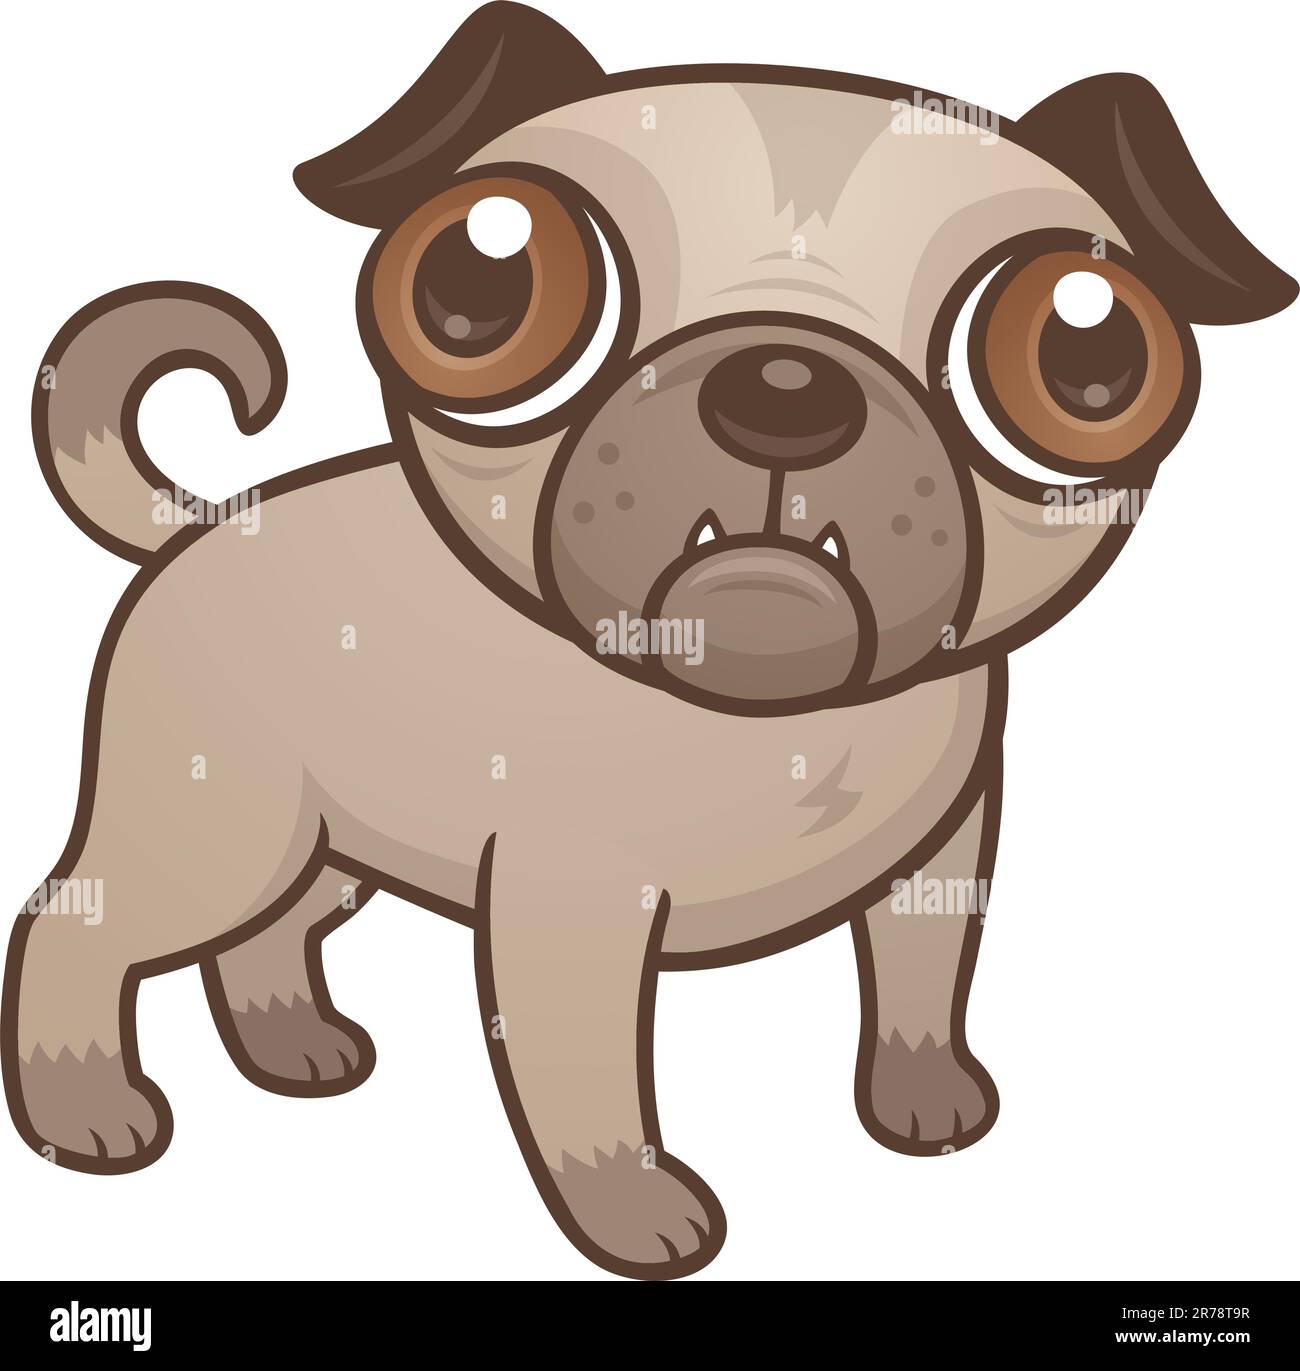 Vector cartoon illustration of a cute Pug puppy dog with really big brown eyes. Stock Vector